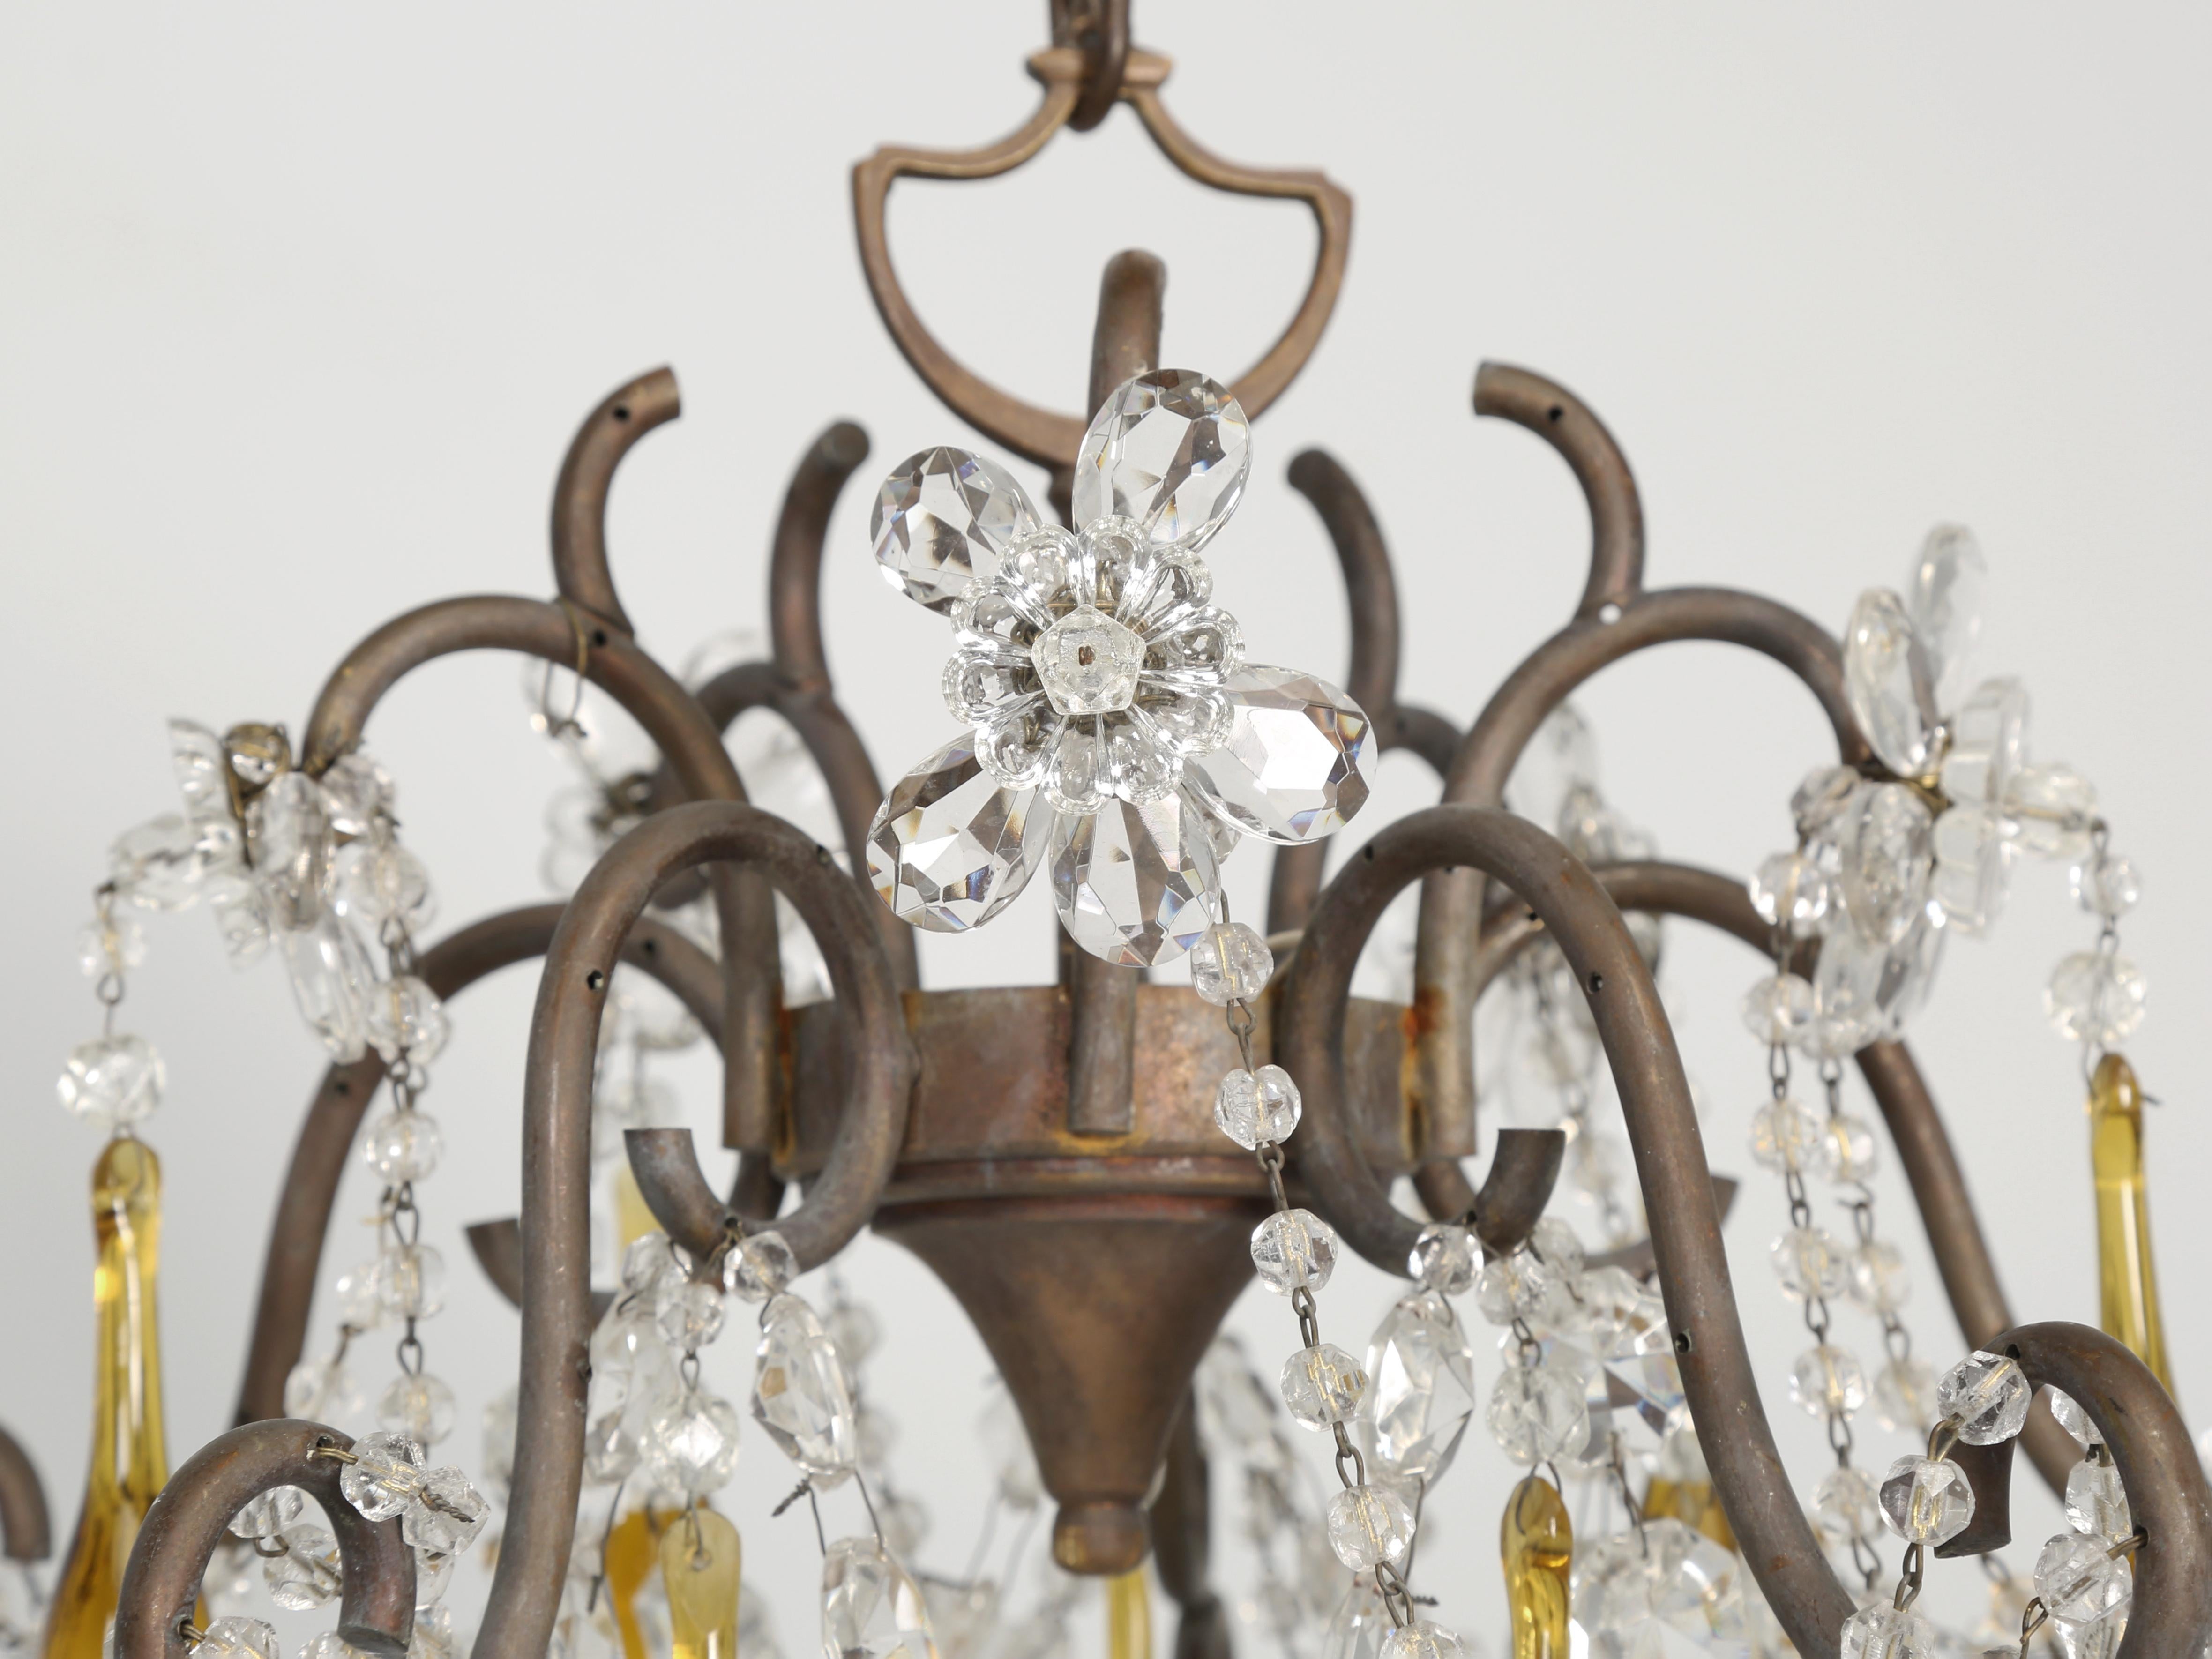 Vintage Italian chandelier with amber crystal drops, cut-glass flowers and beaded strands of wire. The chandelier has been tested and work fine. No prior repairs that we can see and please look thoroughly, for there are a few missing crystals.